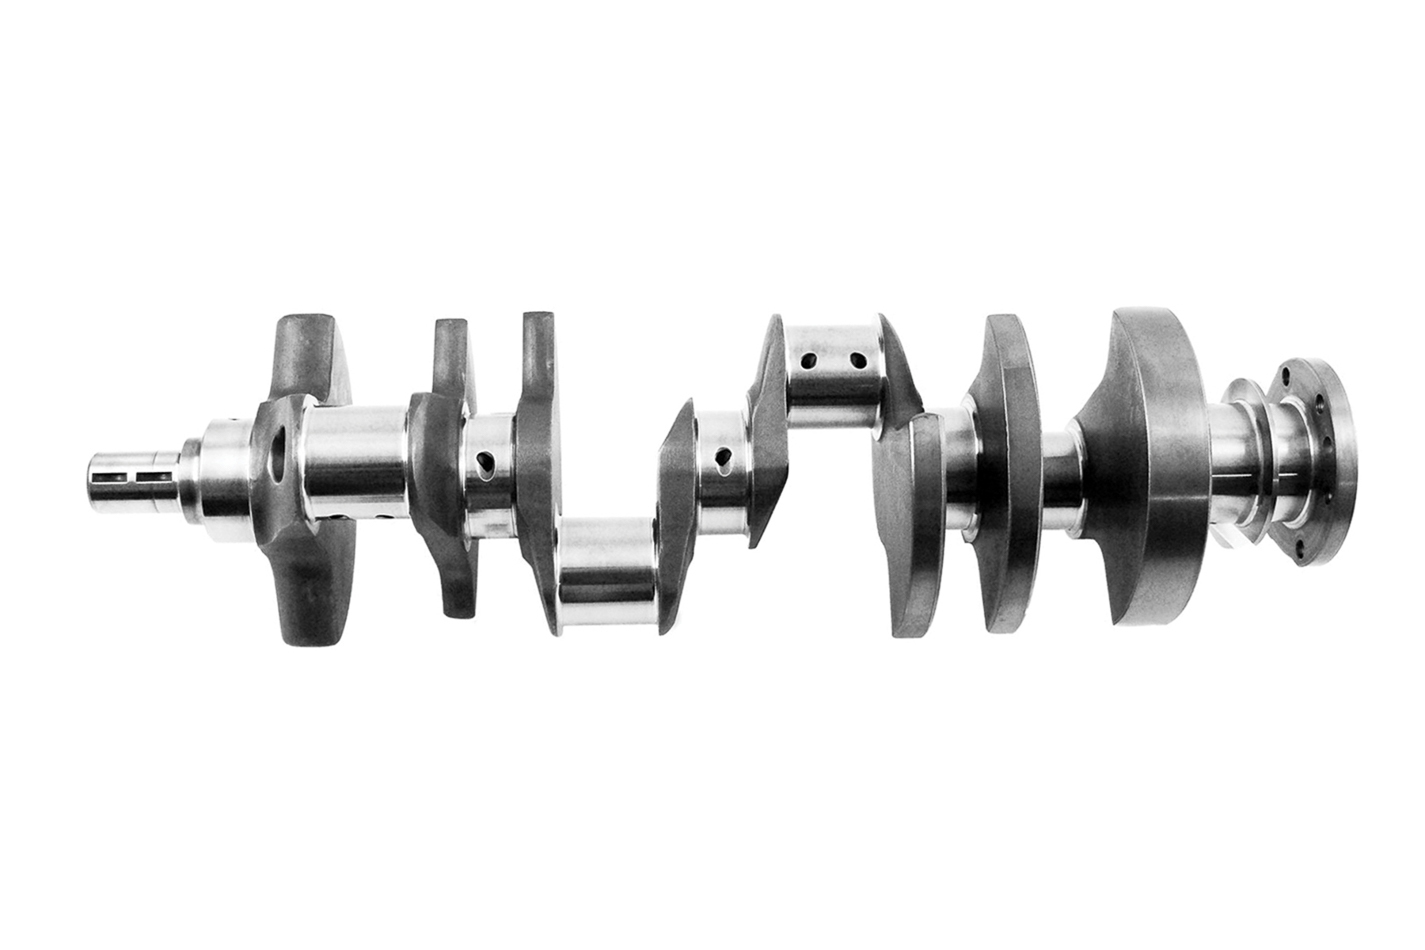 Scat 7-350-3750-5700 - Crankshaft, Excalibur, 3.750 in Stroke, External Balance, Forged Steel, 1 Piece Seal, Small Block Chevy, Each